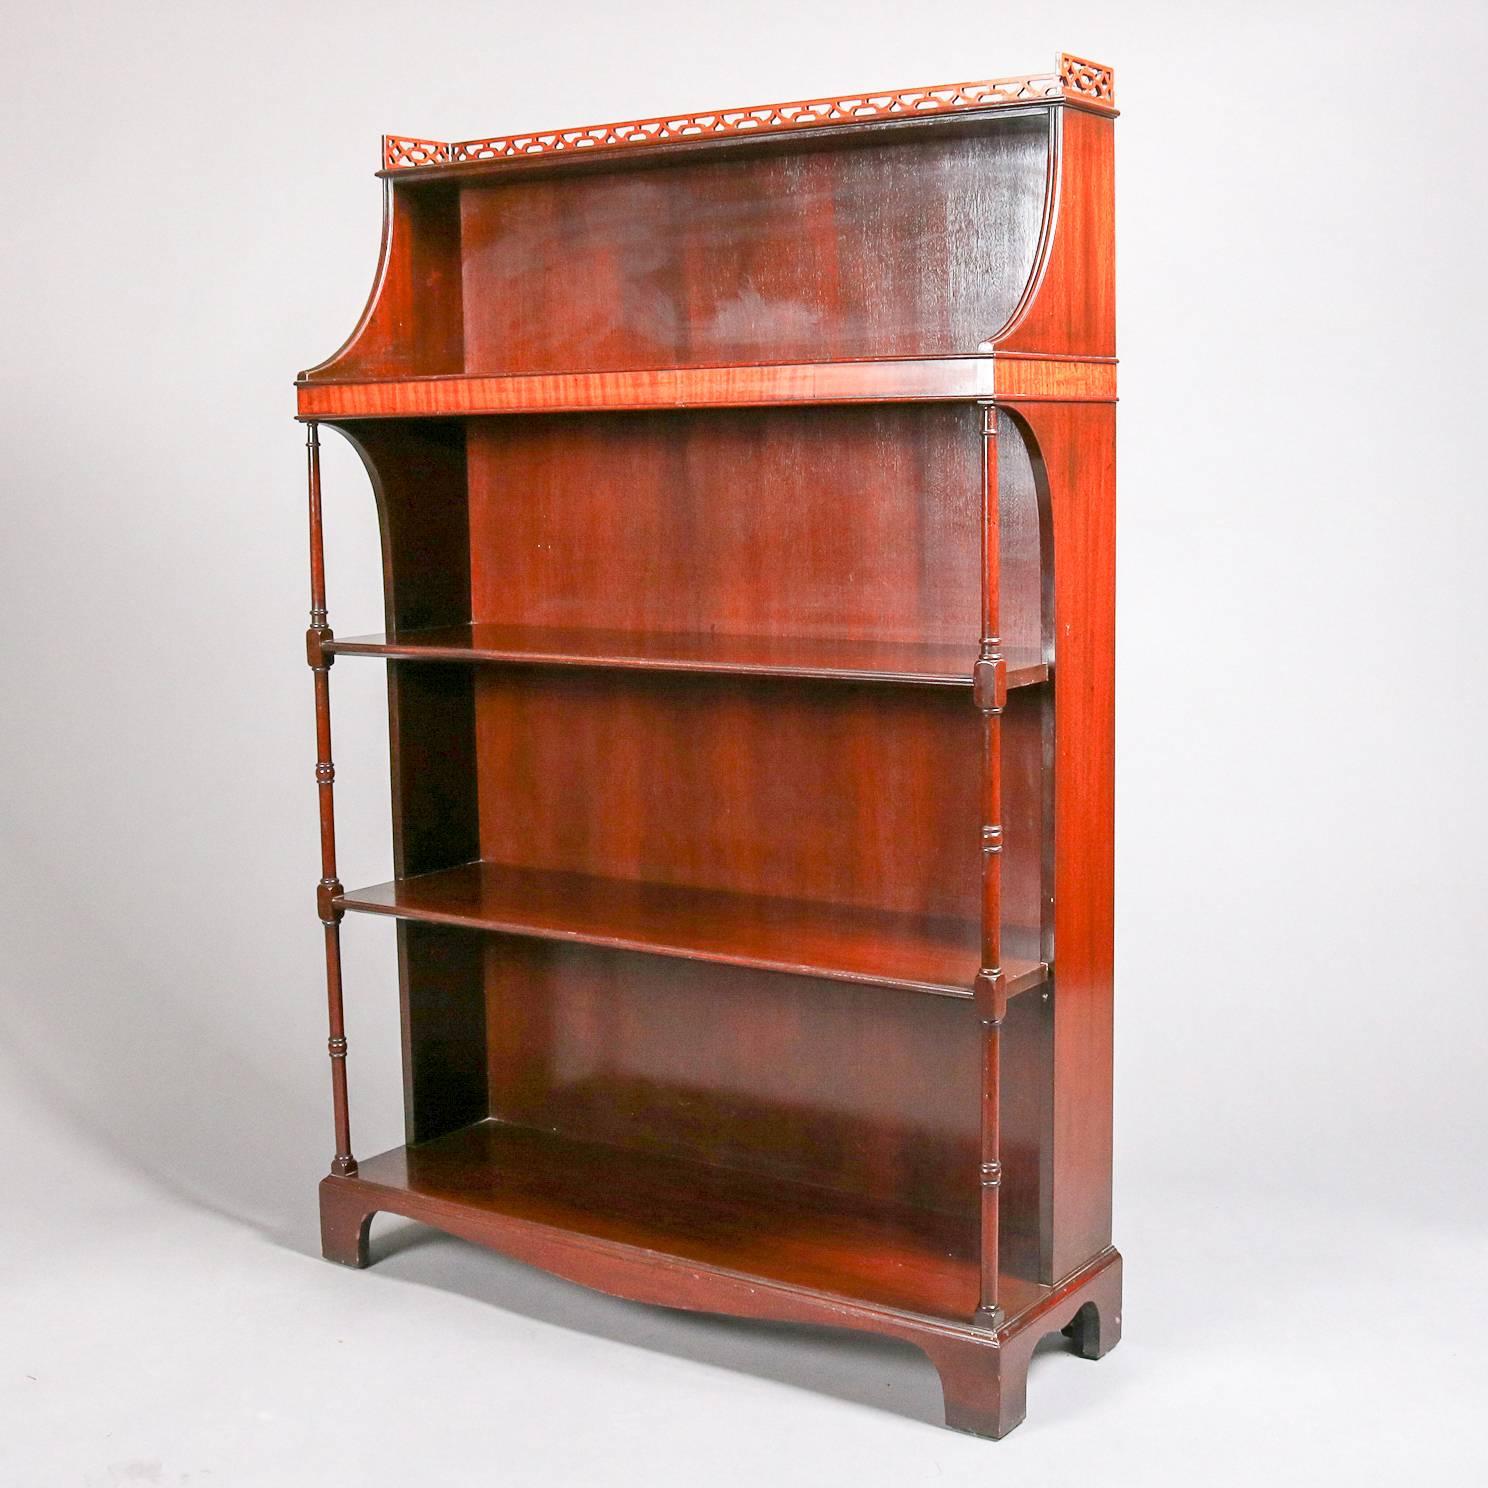 American Antique Federal Style Charak Furniture Mahogany Open Bookcase, 19th Century